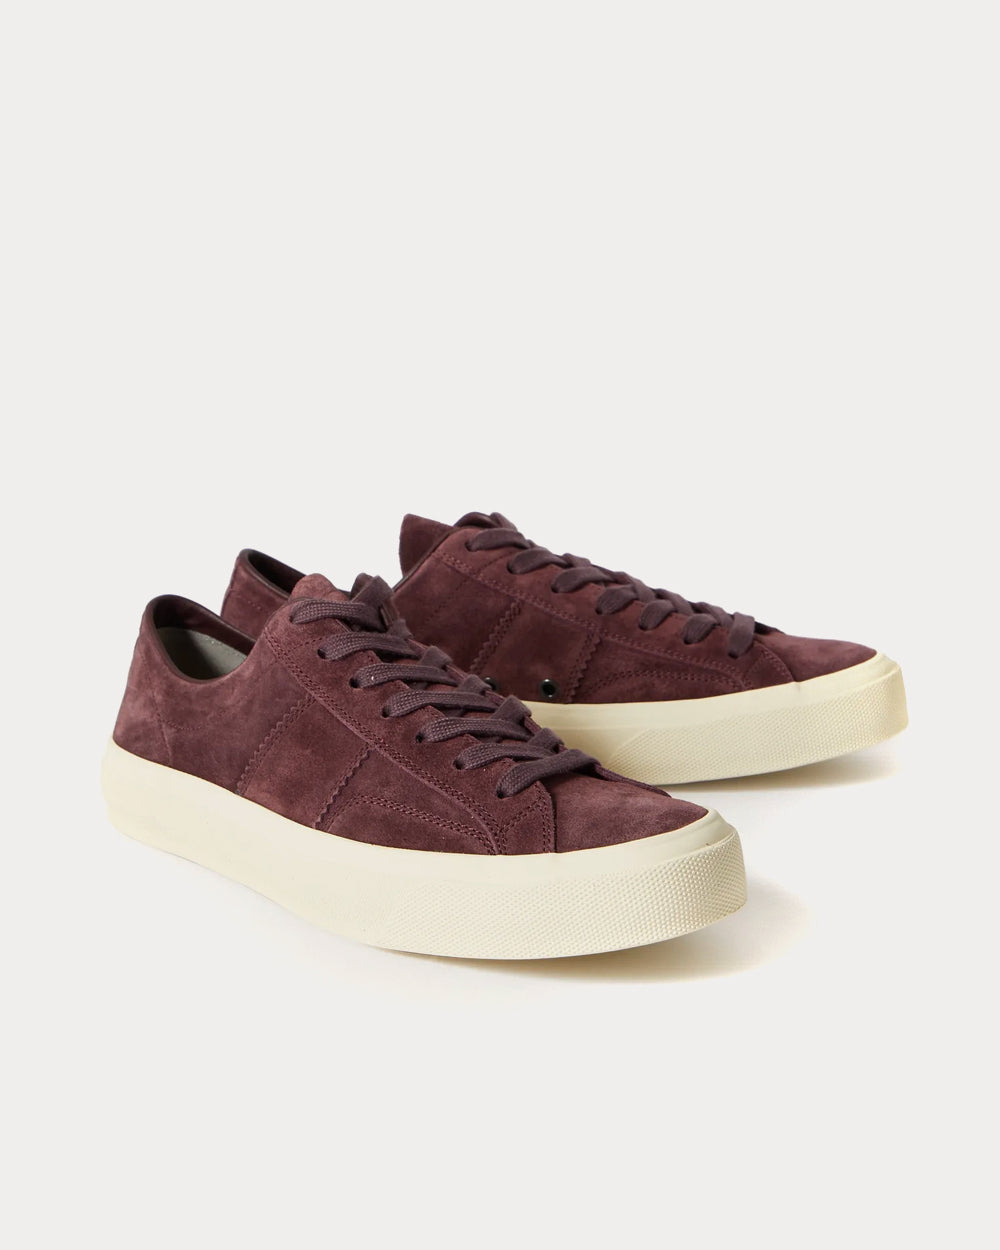 Tom Ford - Cambridge Suede Purple Low Top Sneakers